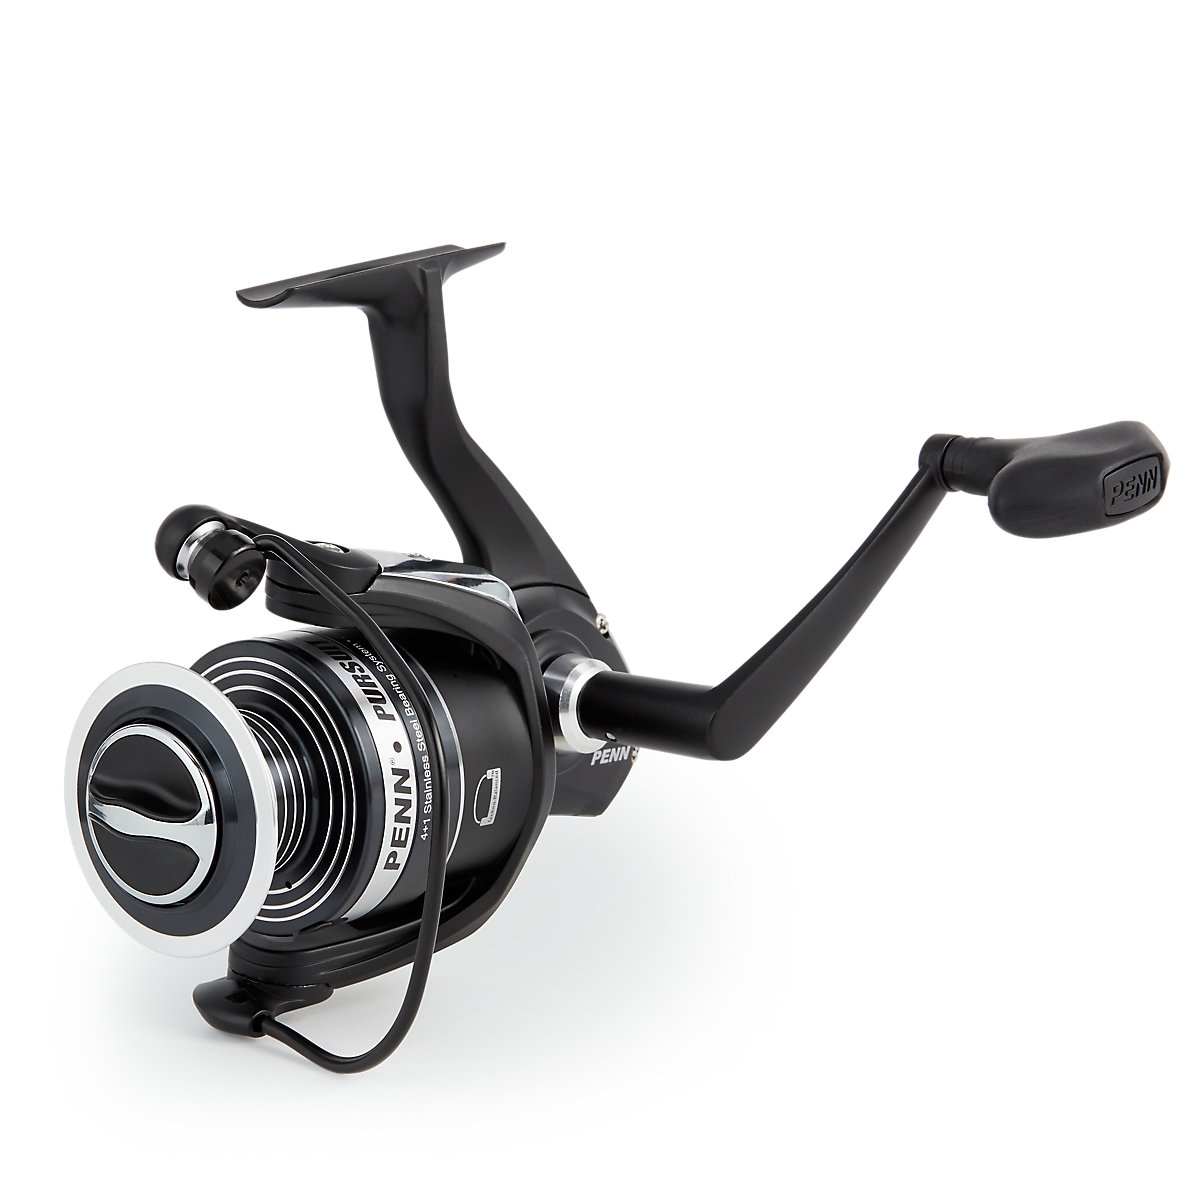 Penn Pursuit II Spin Reel 4000 Boxed 1292958 - image 4 of 6